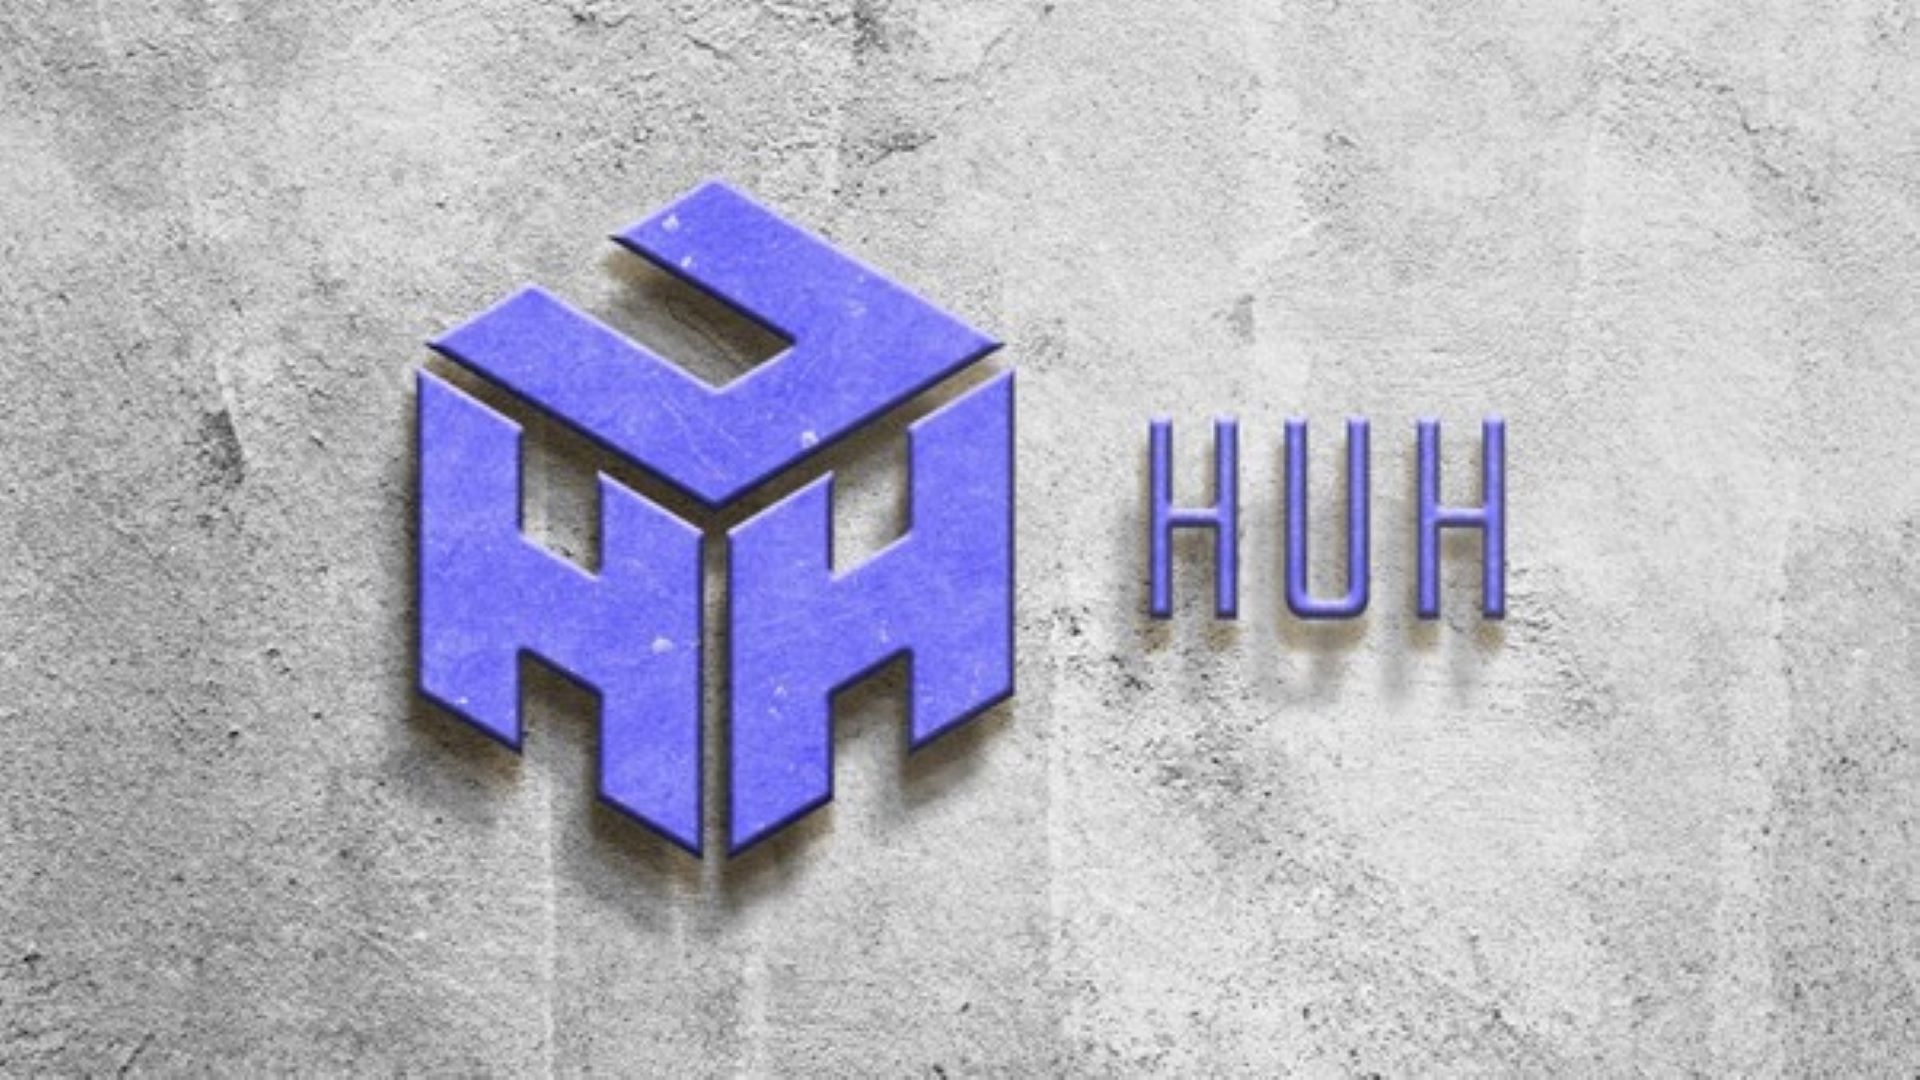 50,000 Influencers to Post About HUH Token – Is Influencer Marketing and Celebrity Endorsements Beneficial to Cryptos Like Apecoin